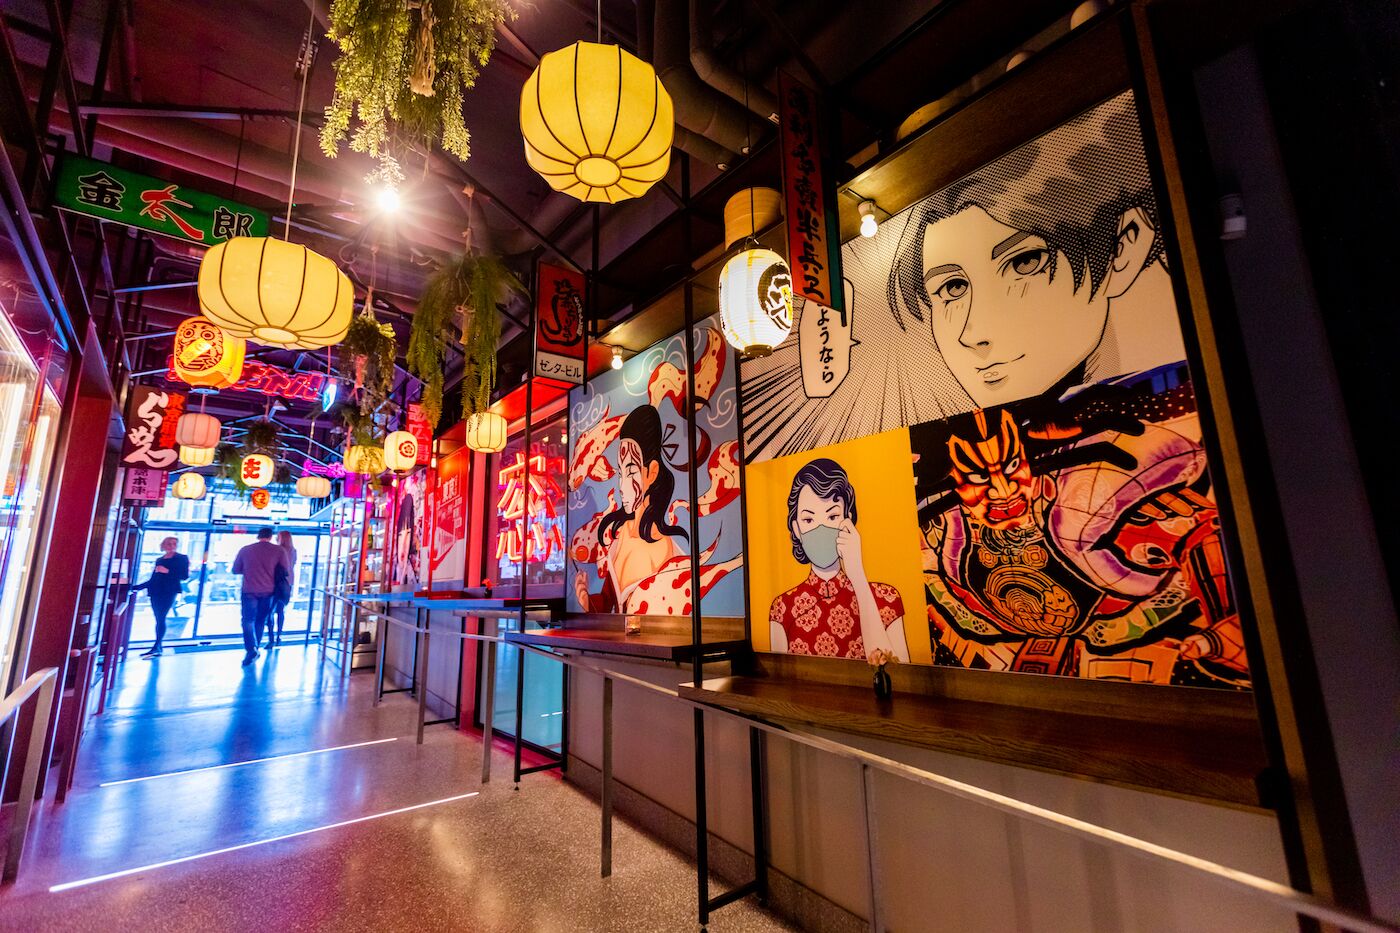 Asian brasserie located inside Space, the largest gaming entertainment center, located in Sweden